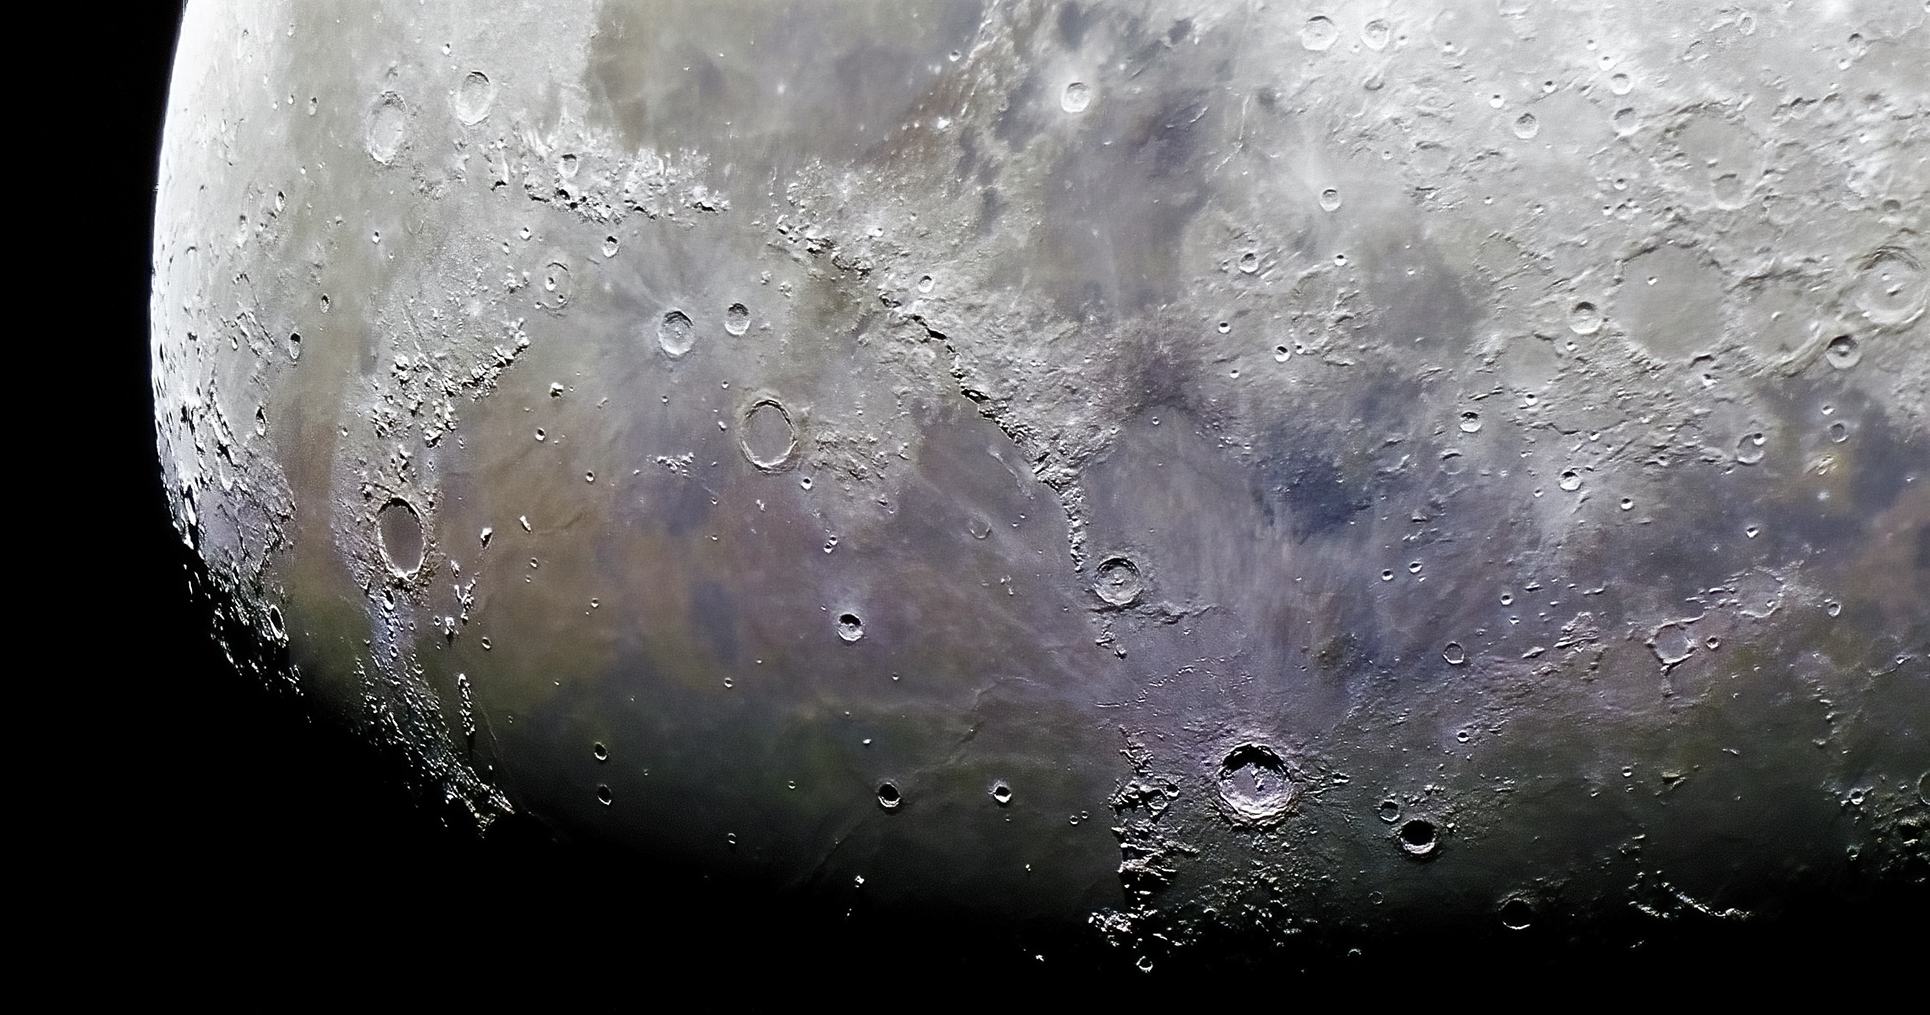 Moon photographed with Pentax K-3 MIII and astrotracer O-GPS2